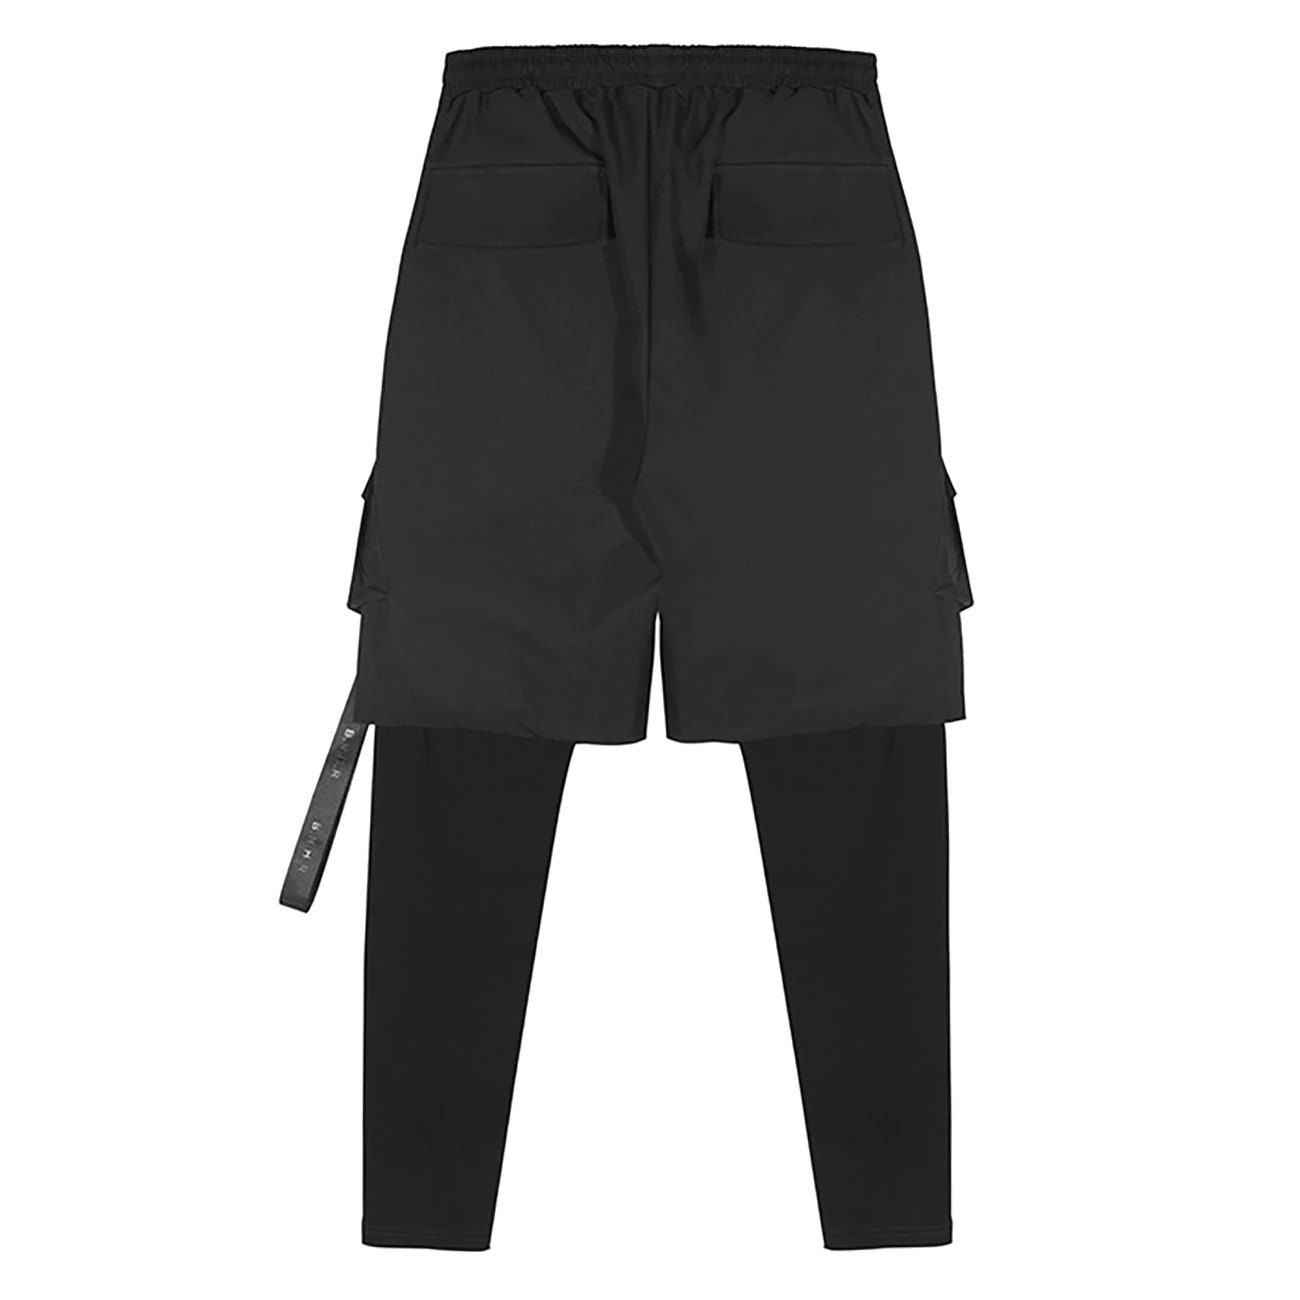 Athletic Japanese Streetwear Basketball Shorts With Tights - Etsy